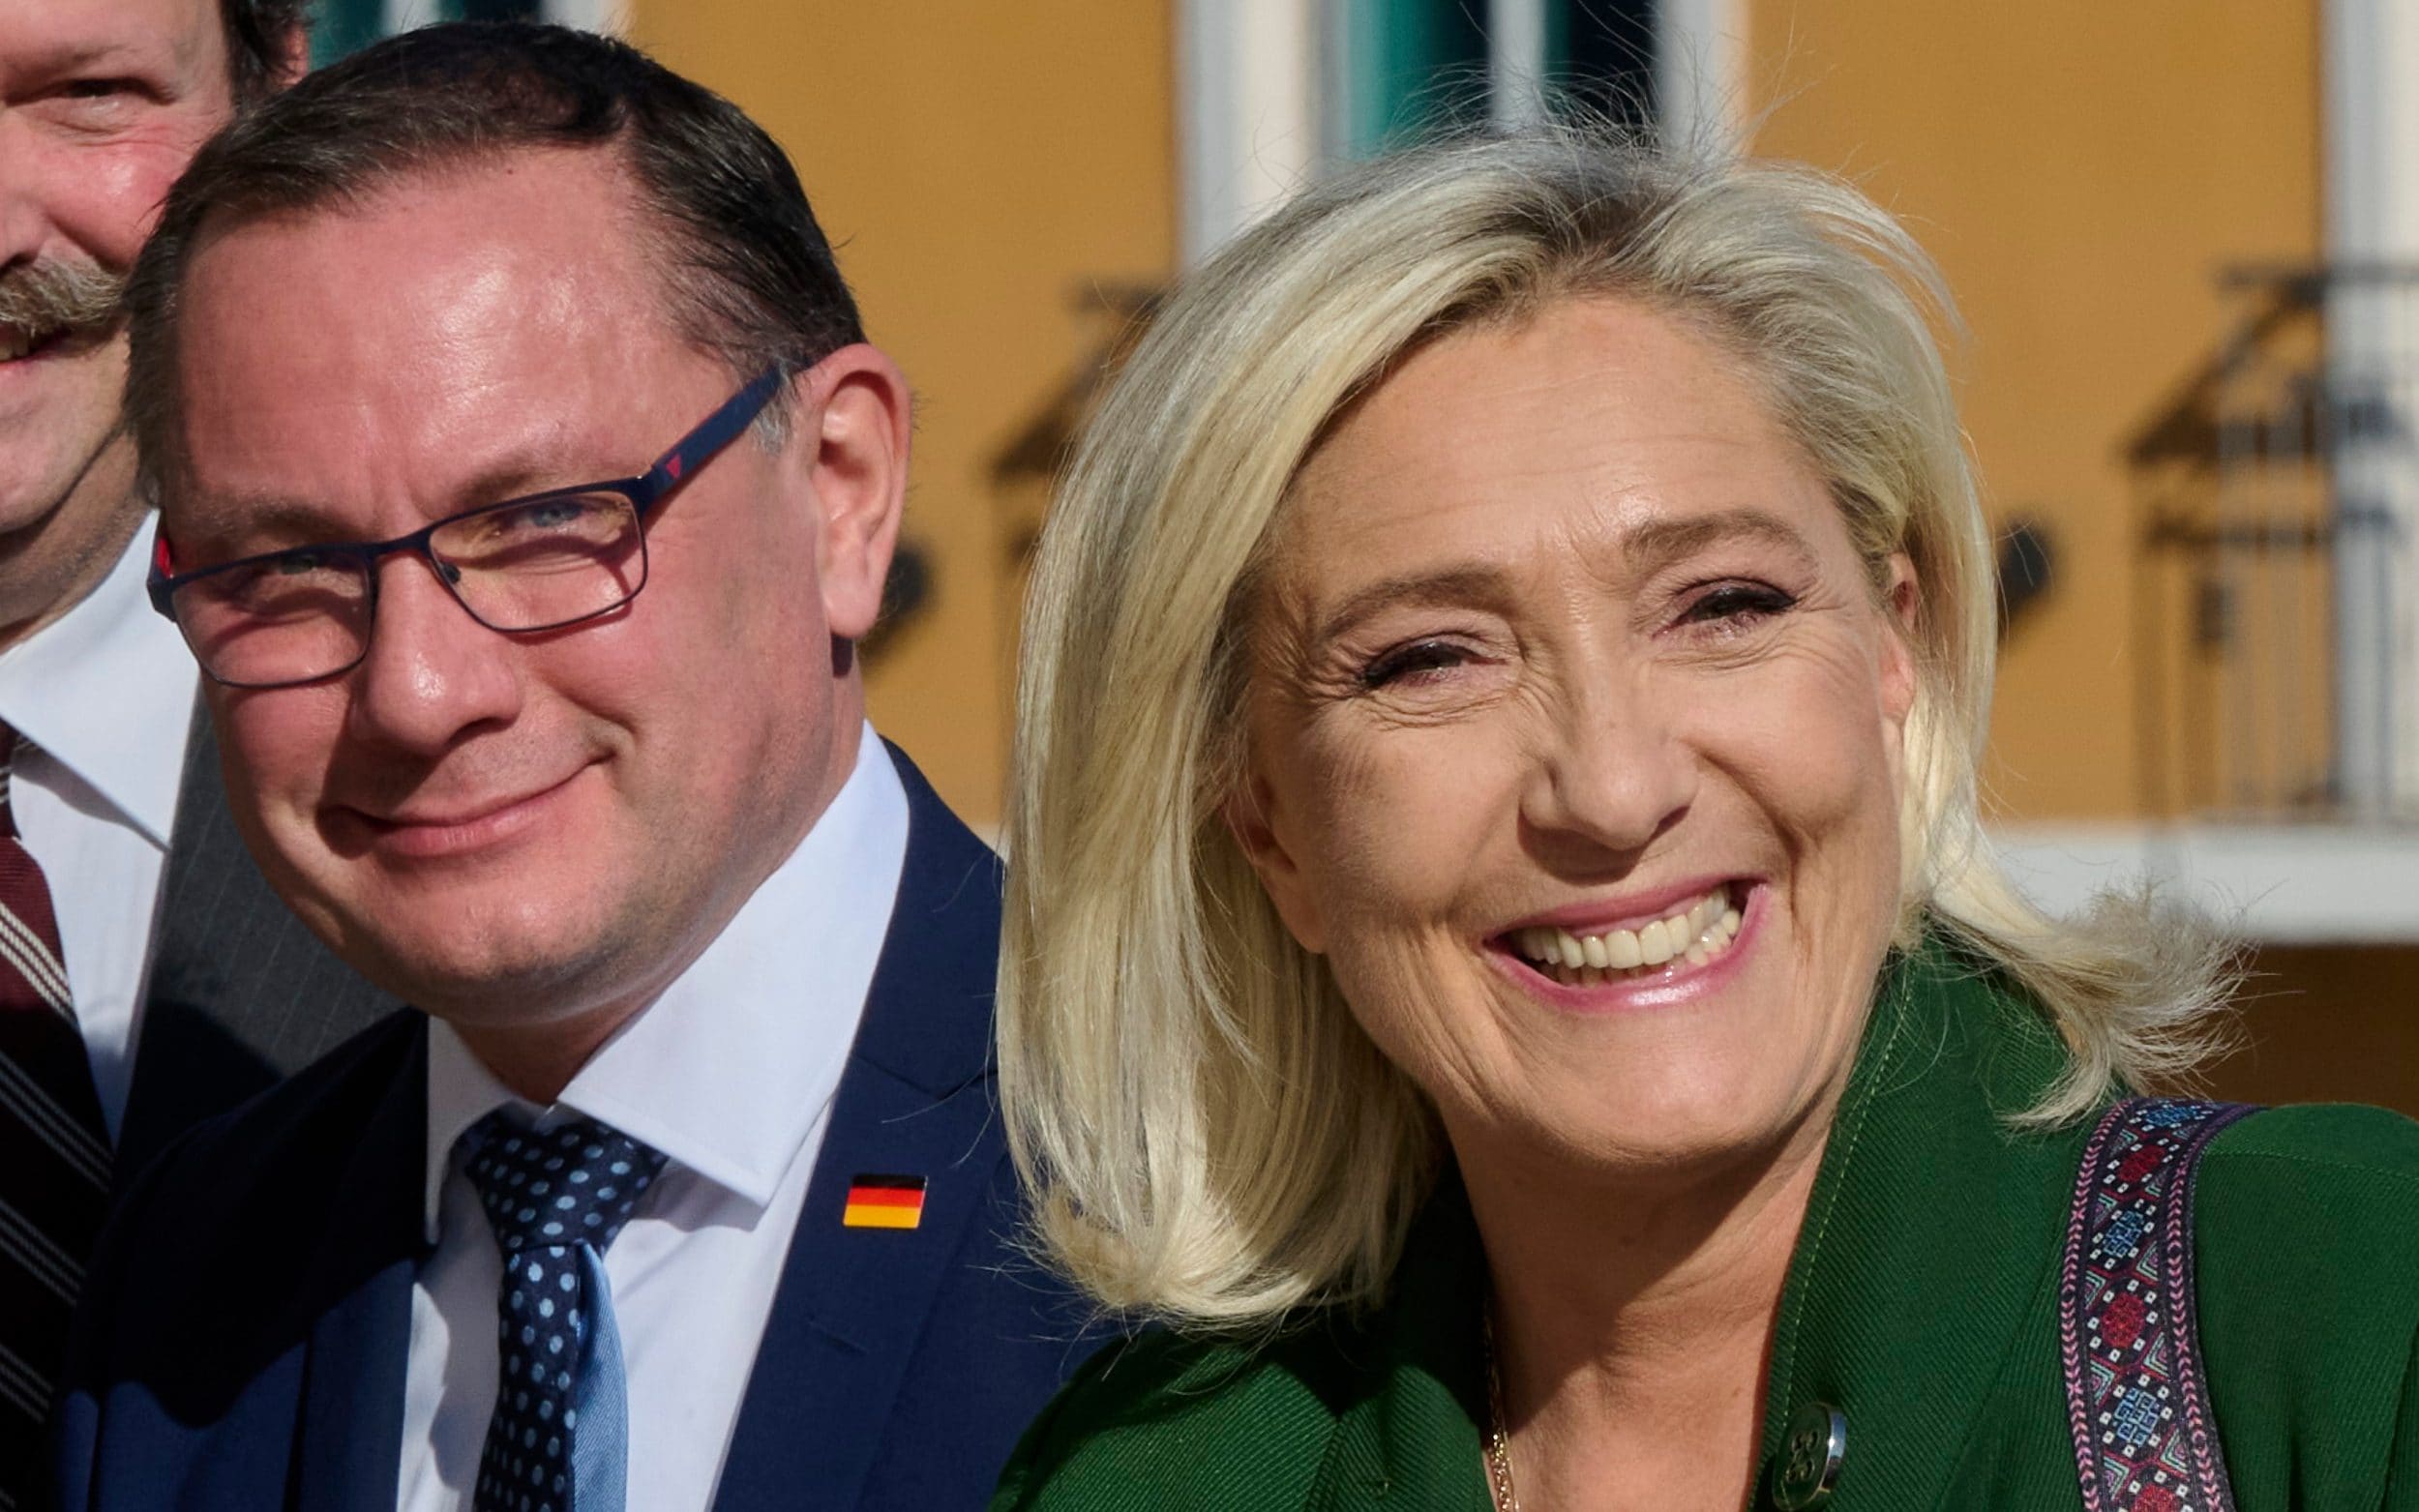 Le Pen’s party cuts ties with Germany’s AfD after Nazi SS scandal